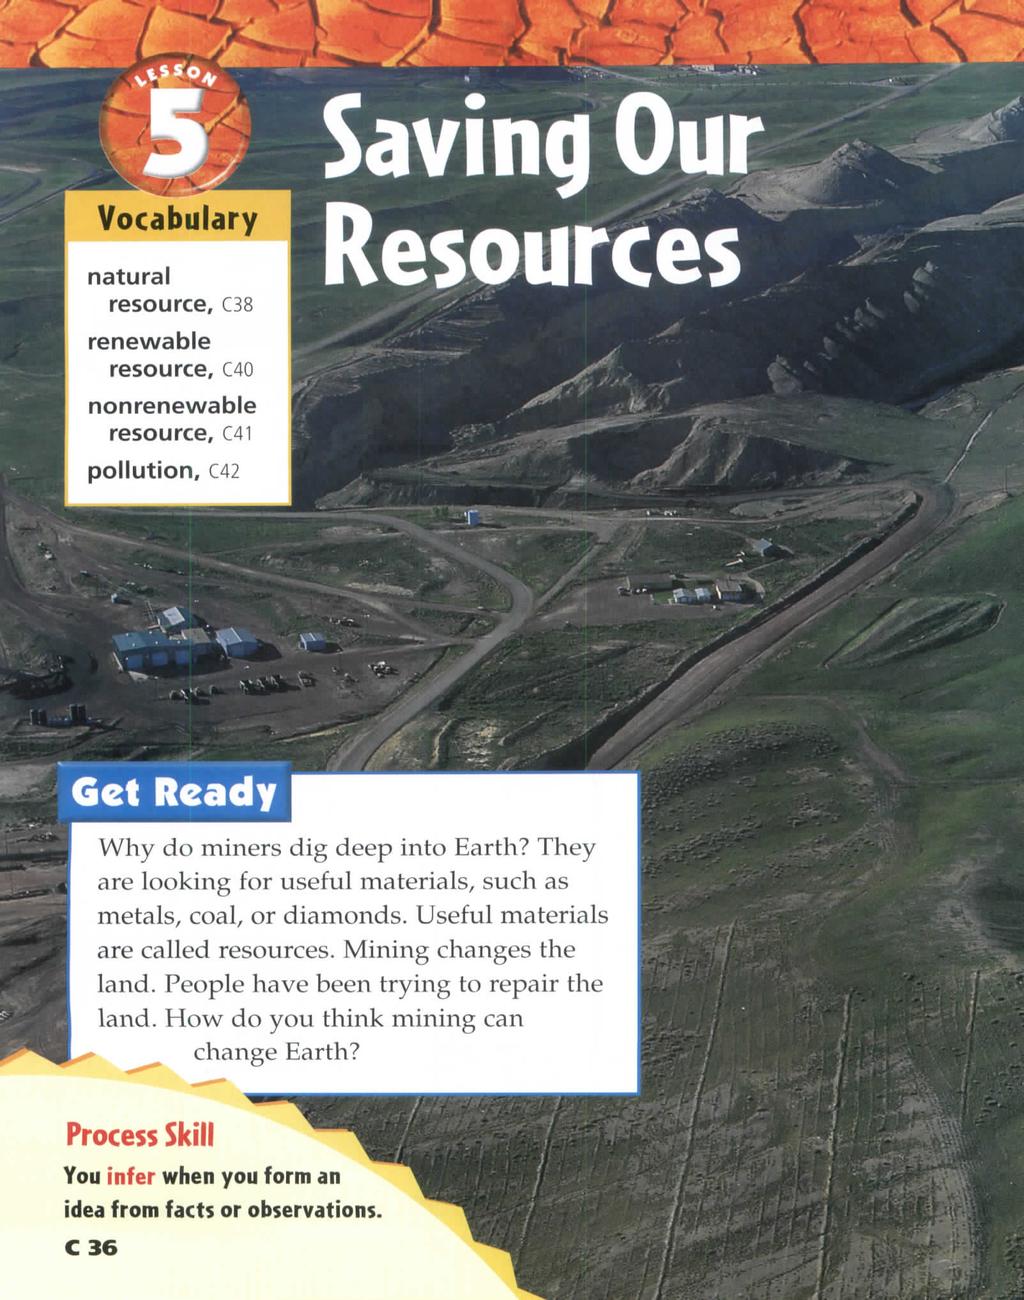 / ^ Vocabulary natural resource, C38 renewable resource, C40 nonrenewable resource, C41 pollution, C42 esources Why do miners dig deep into Earth?